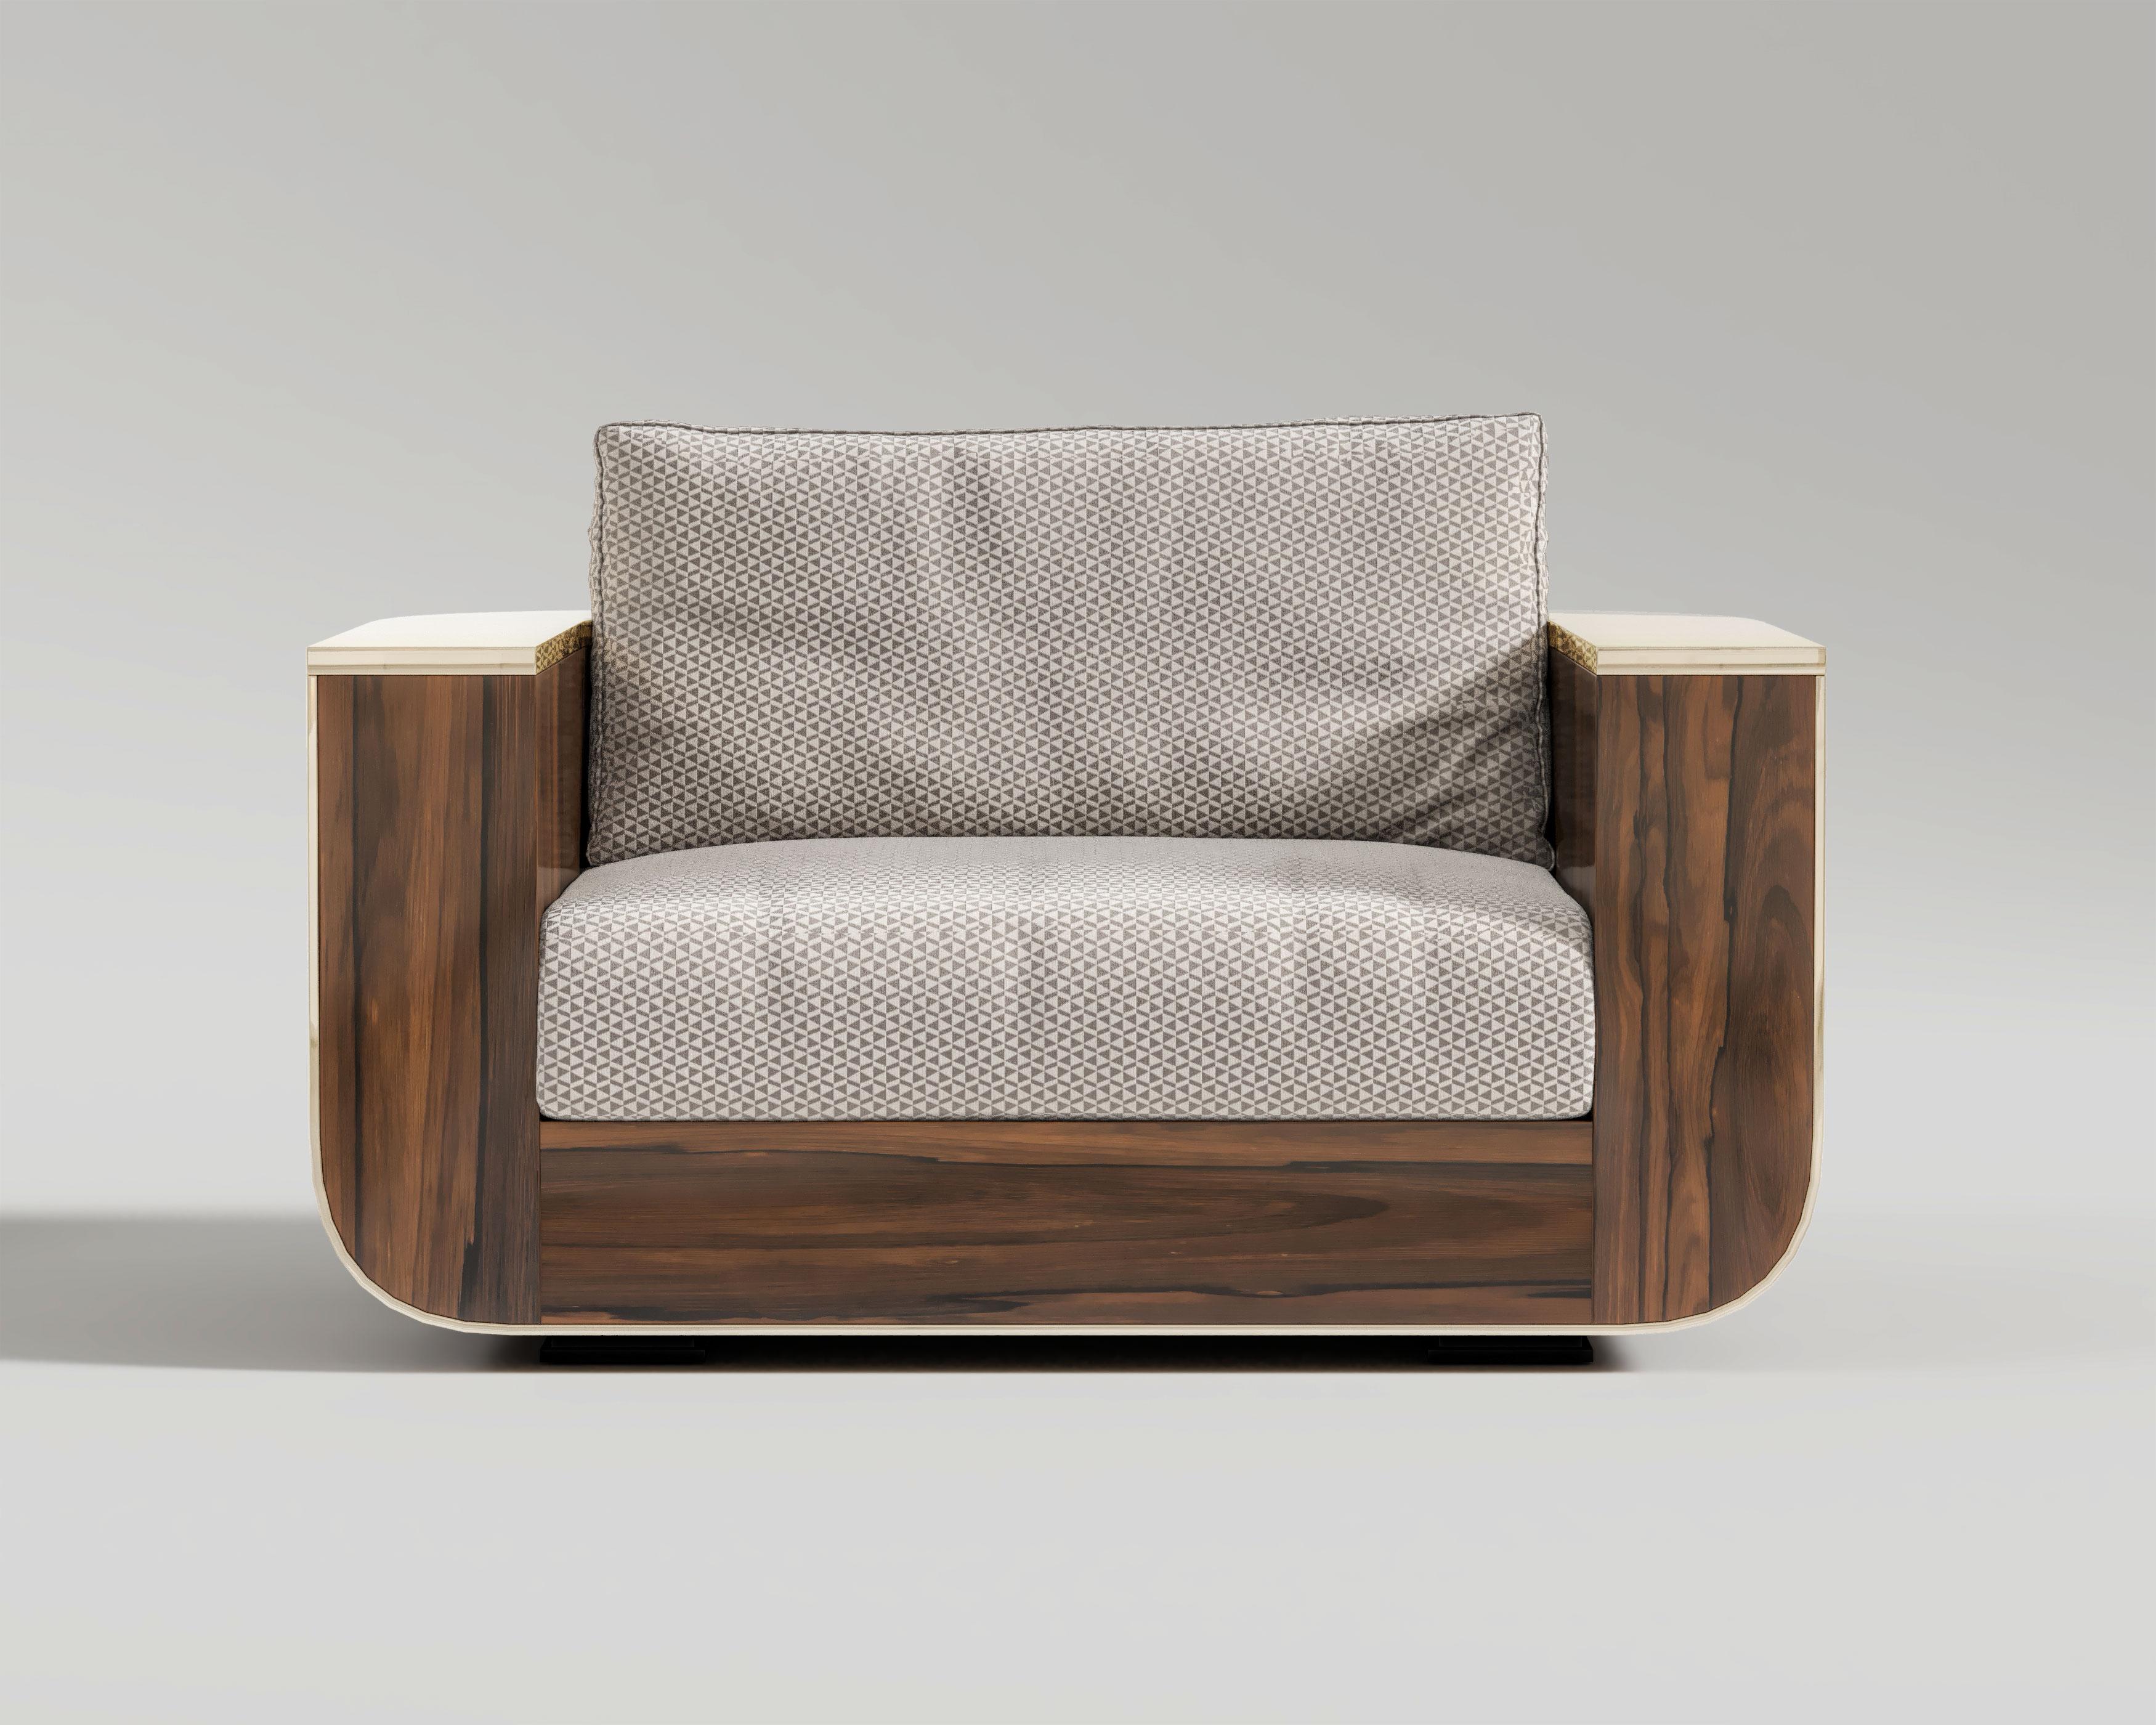 Forte Sofa Eucalyptus

The Forte Lounge Chair is an artisanal piece of contemporary design, with a walnut frame beautifully highlighted with polished bronze accents. Luxury is added to the opulence. Its smooth edges and cozy materials distribute